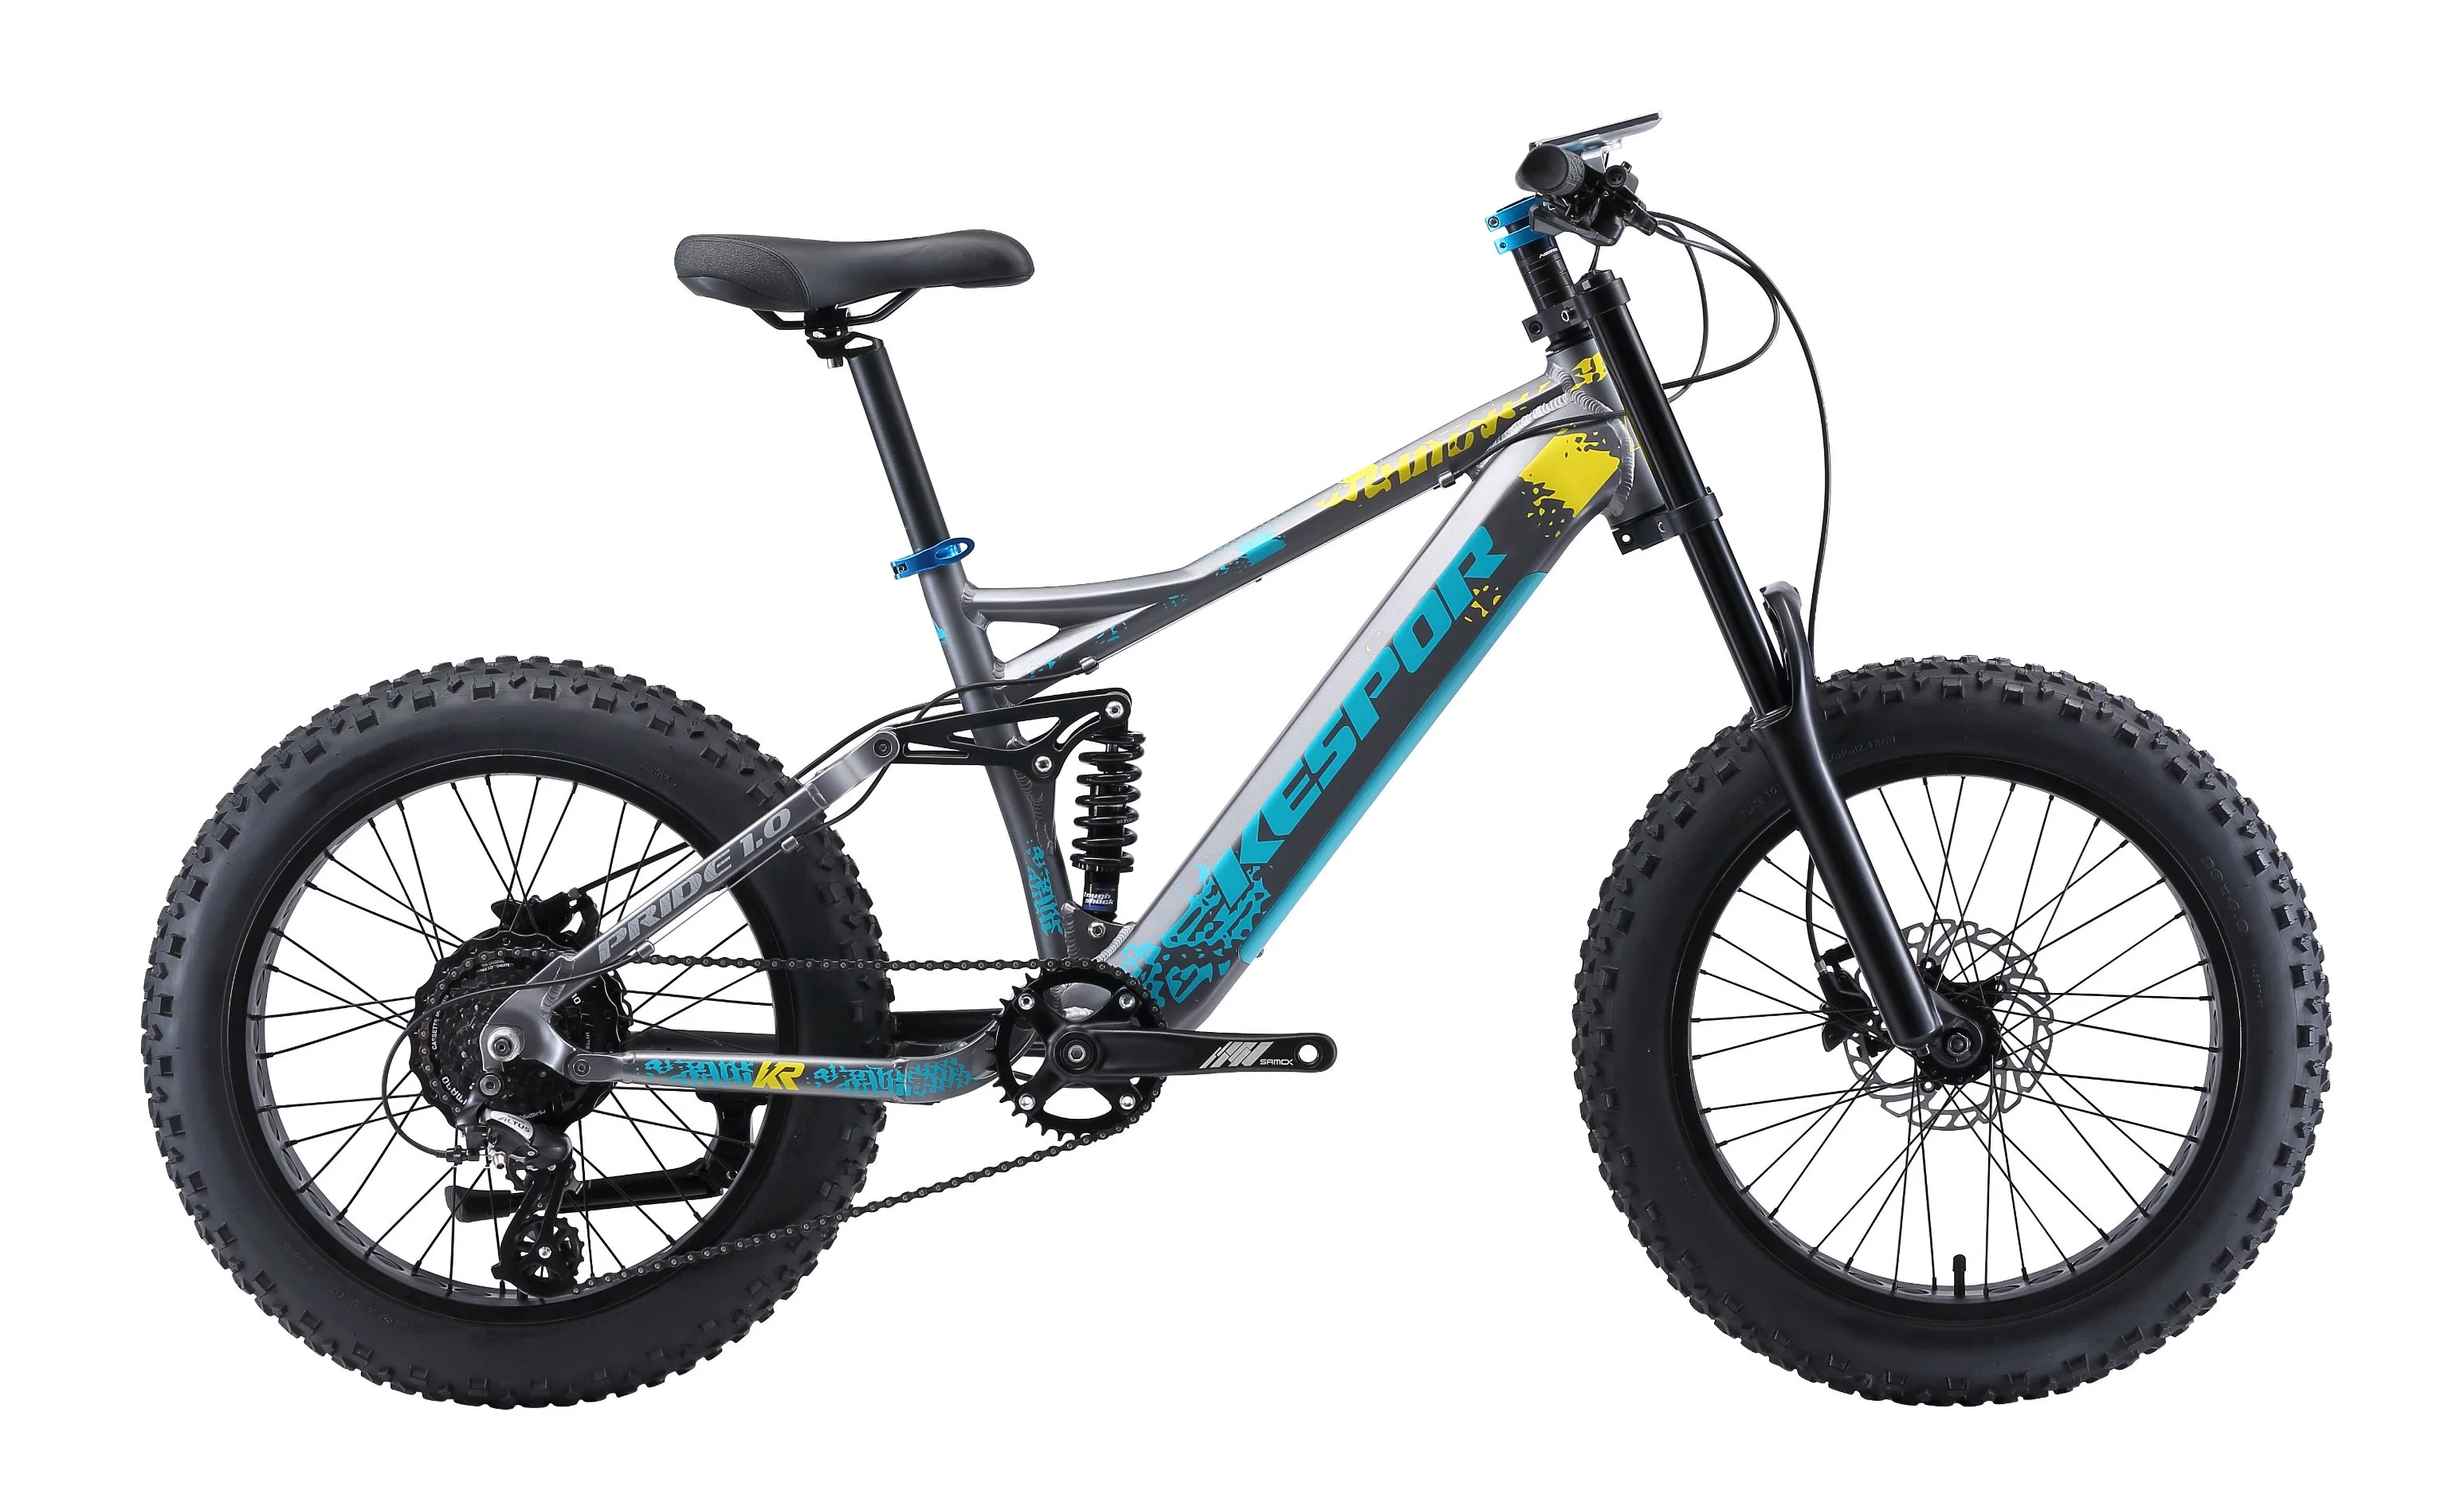 China Wholesale/Supplier Full Suspension Mountain Electric Bike Bicycle 20" Fat Tire 48V 500W Motor with Integrated Hidden Battery E Bike